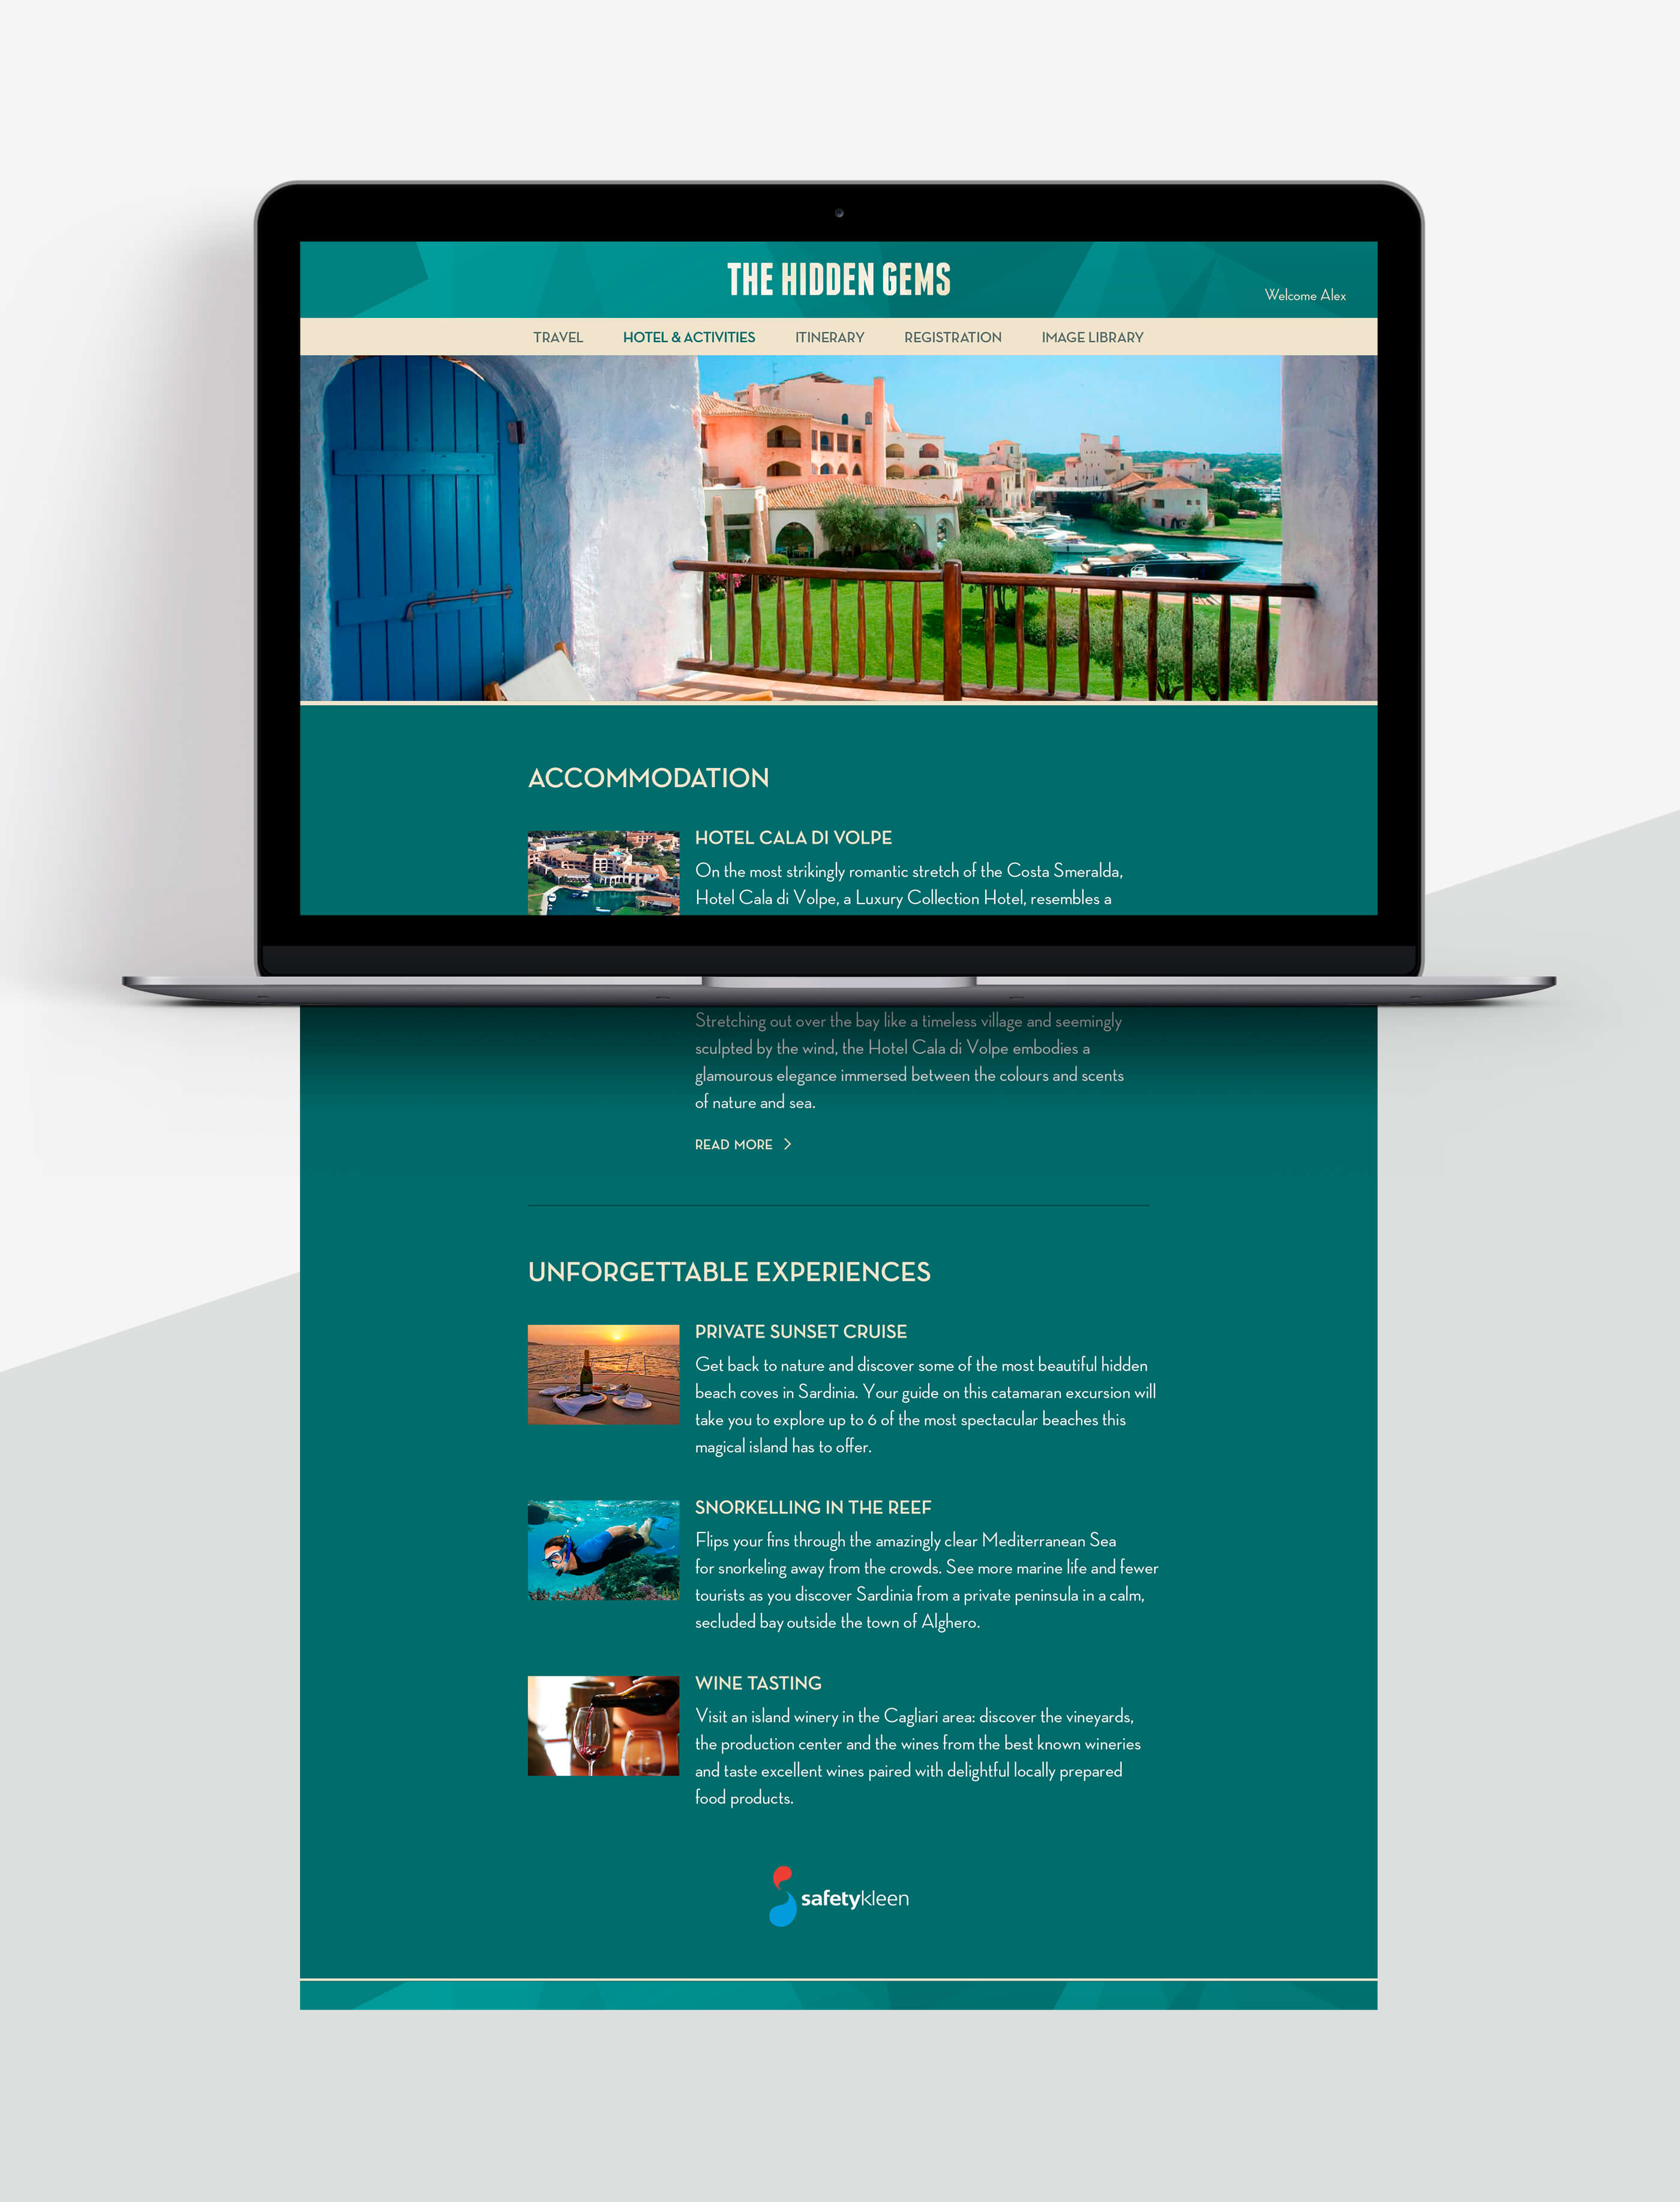 Full webpage design of the 'Hotels and Activities' section of the website, with details and images of the accommodation and experiences guests will enjoy set against a dark green background